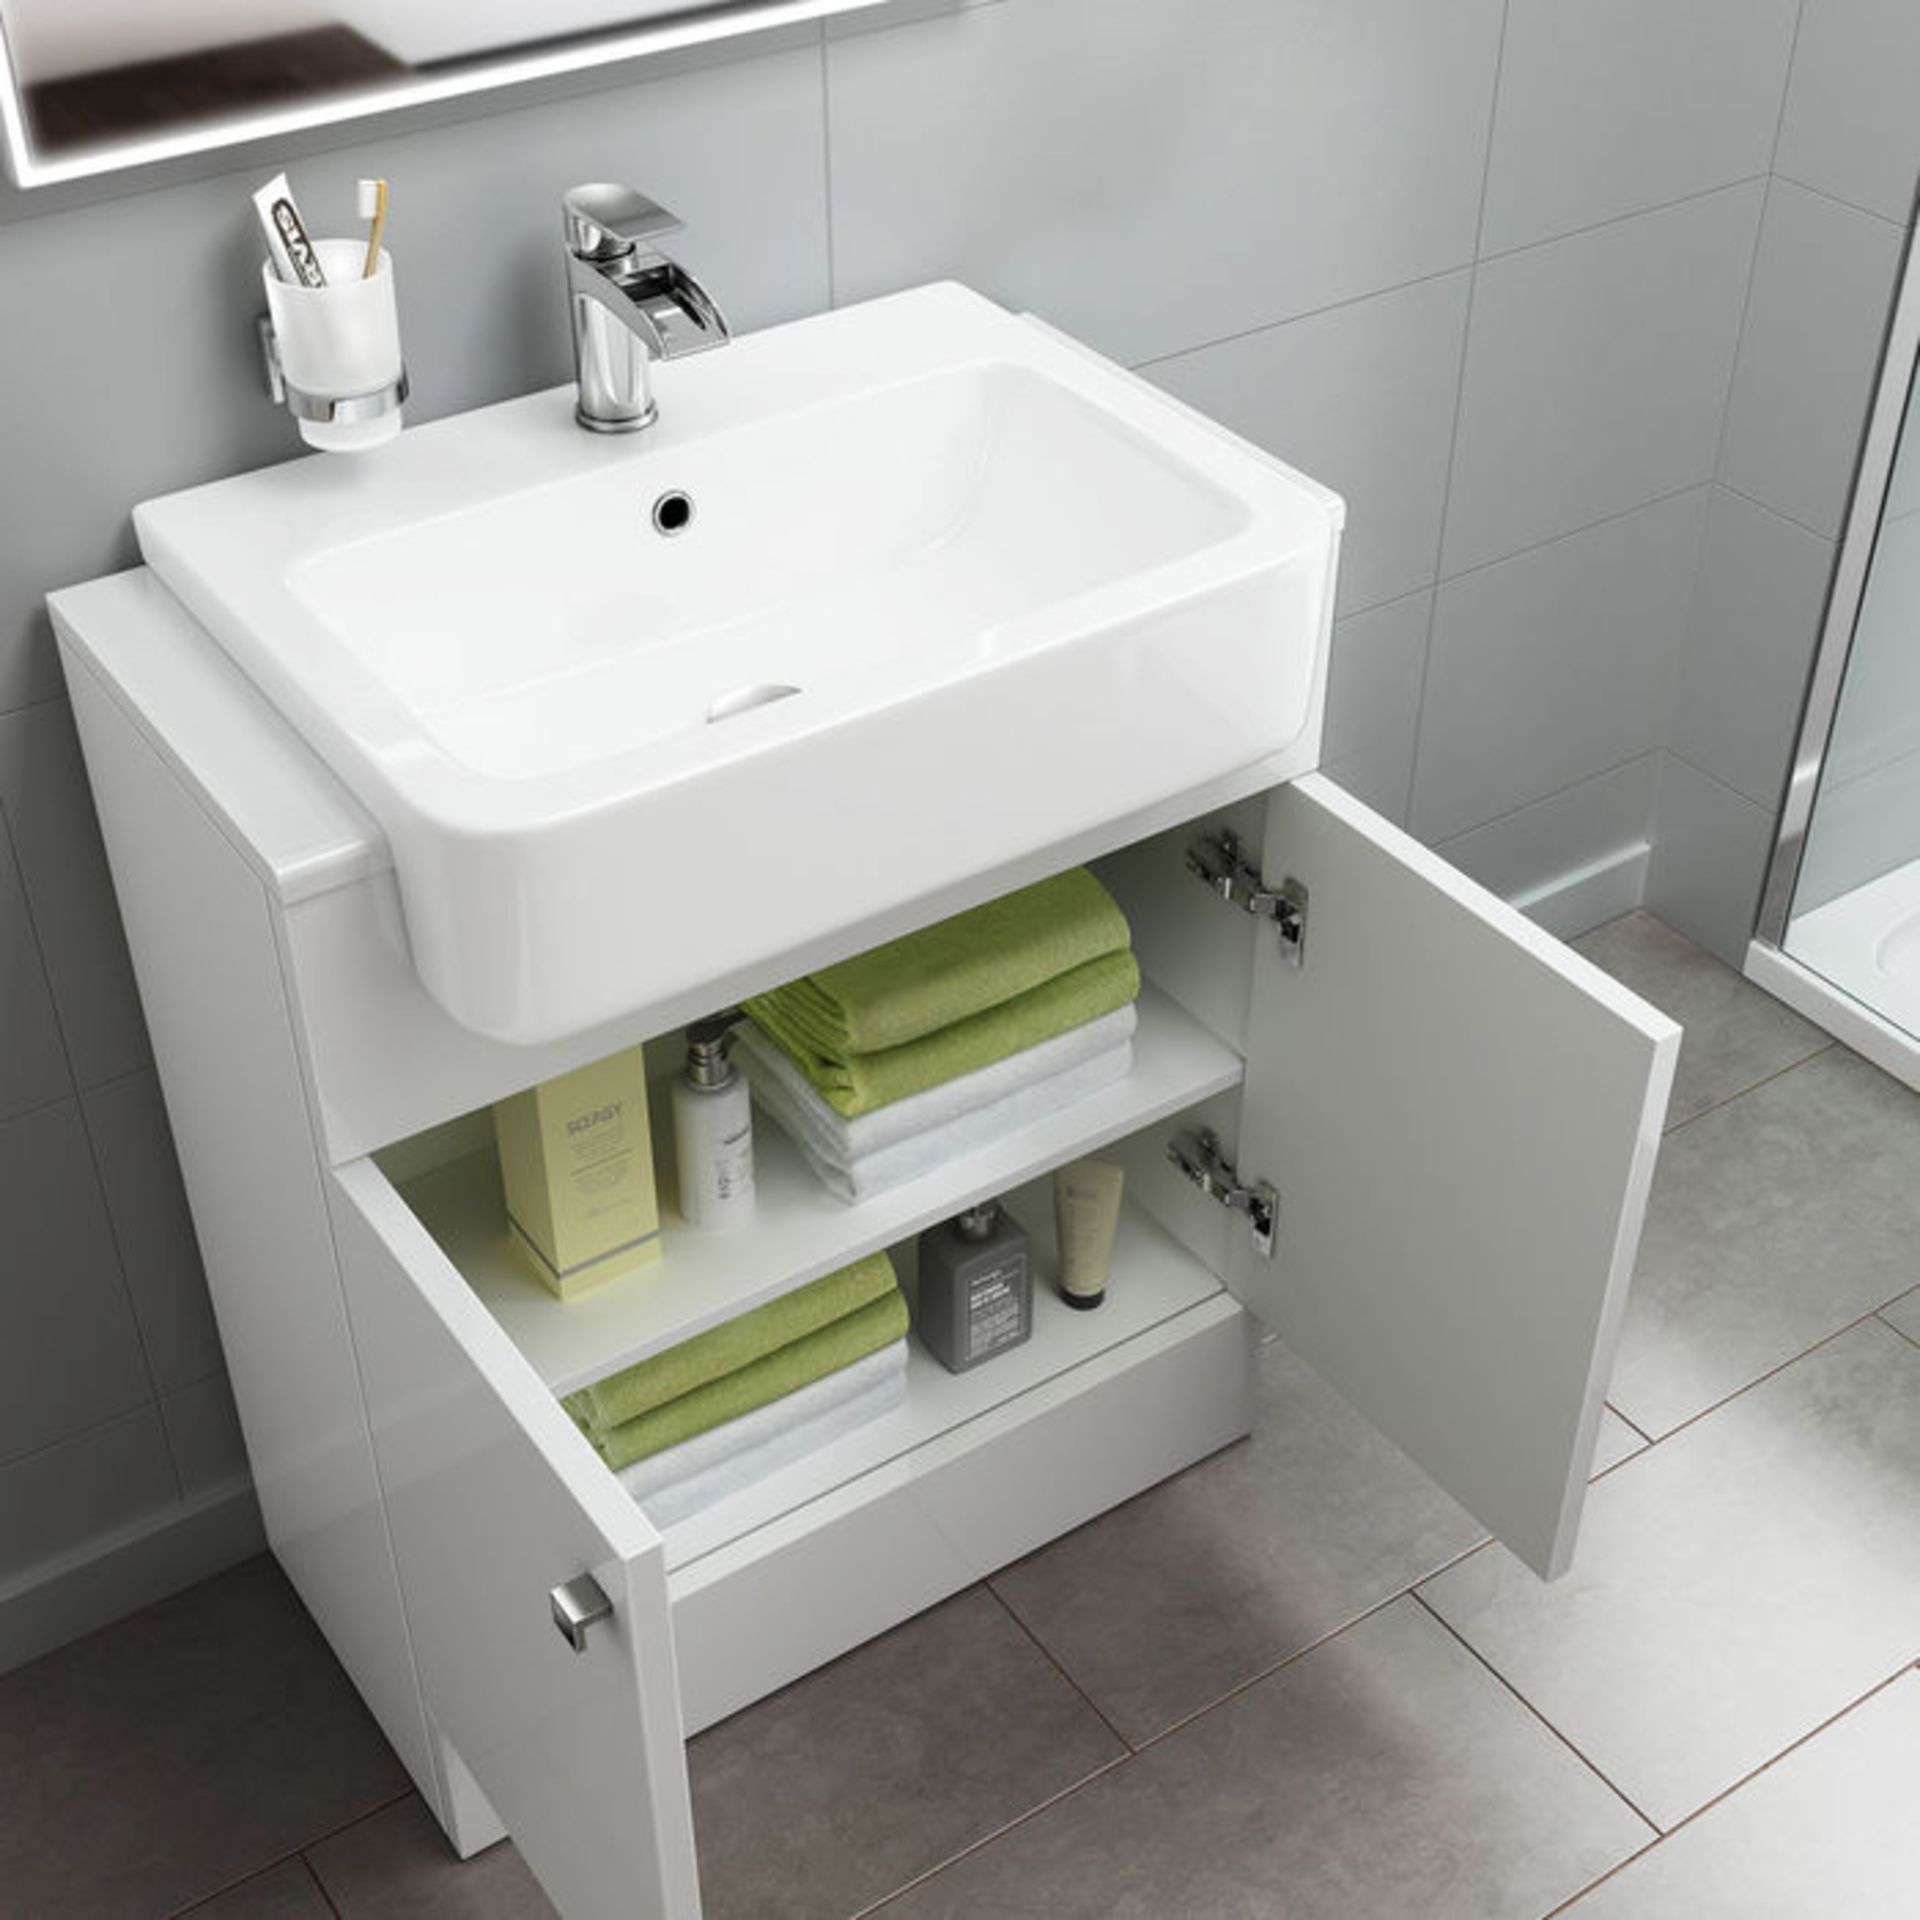 (TS171) 660mm Harper Gloss White Basin Vanity Unit - Floor Standing. RRP £499.99. Comes complete - Image 2 of 5